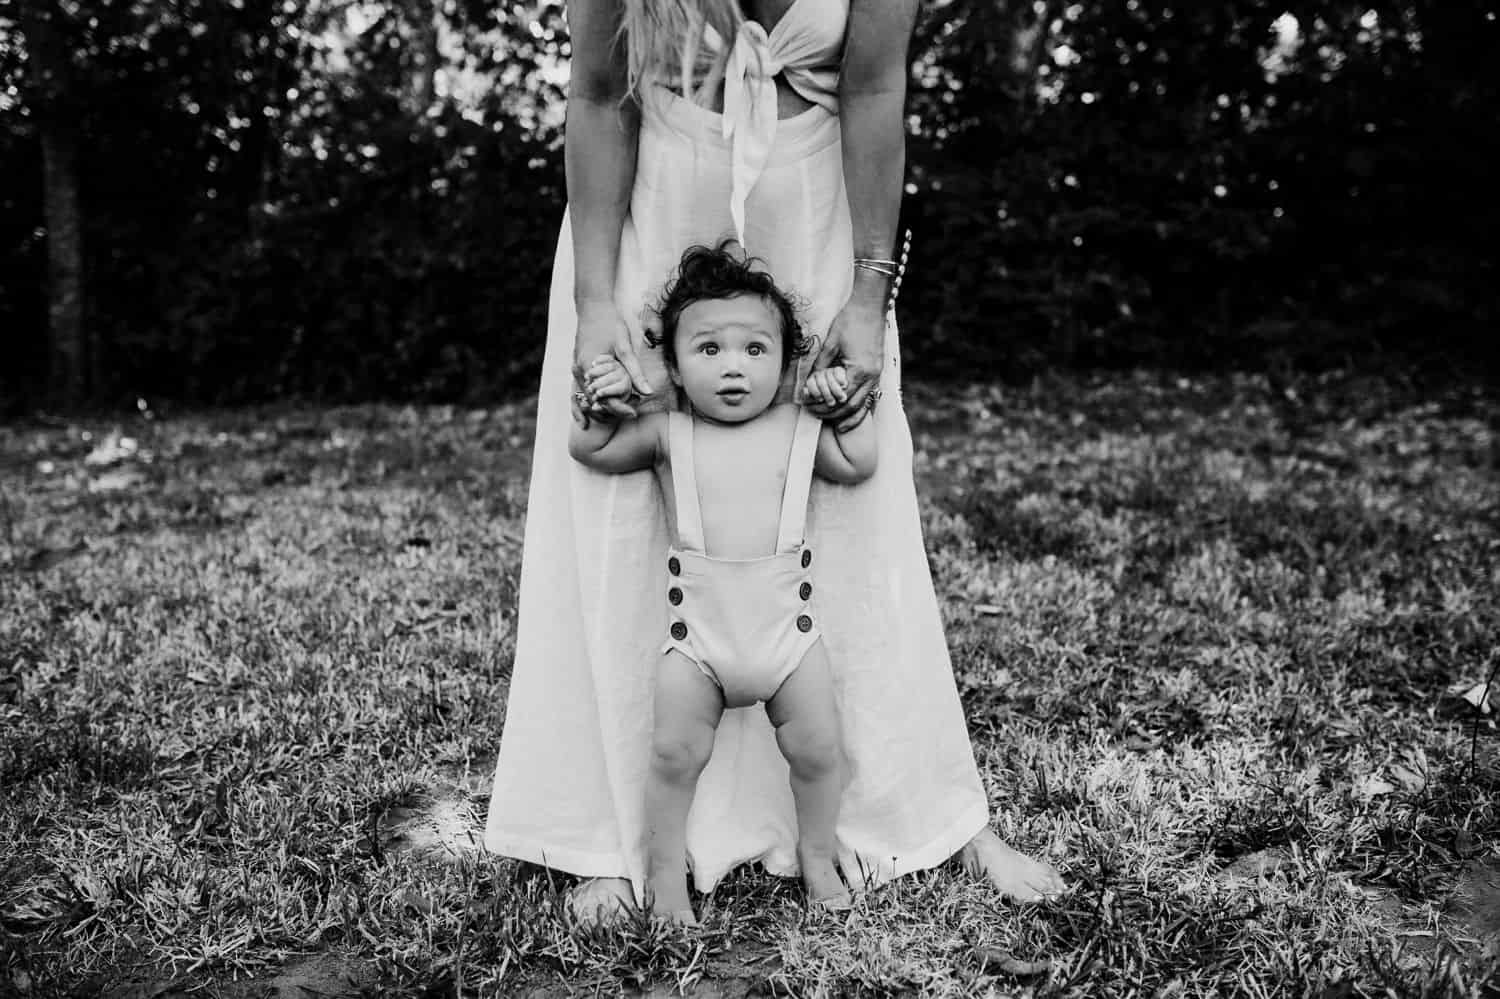 Black and white photo of a toddler standing in front of his mother. He's wearing overalls with no shirt, and only the mother's arms and legs are visible.